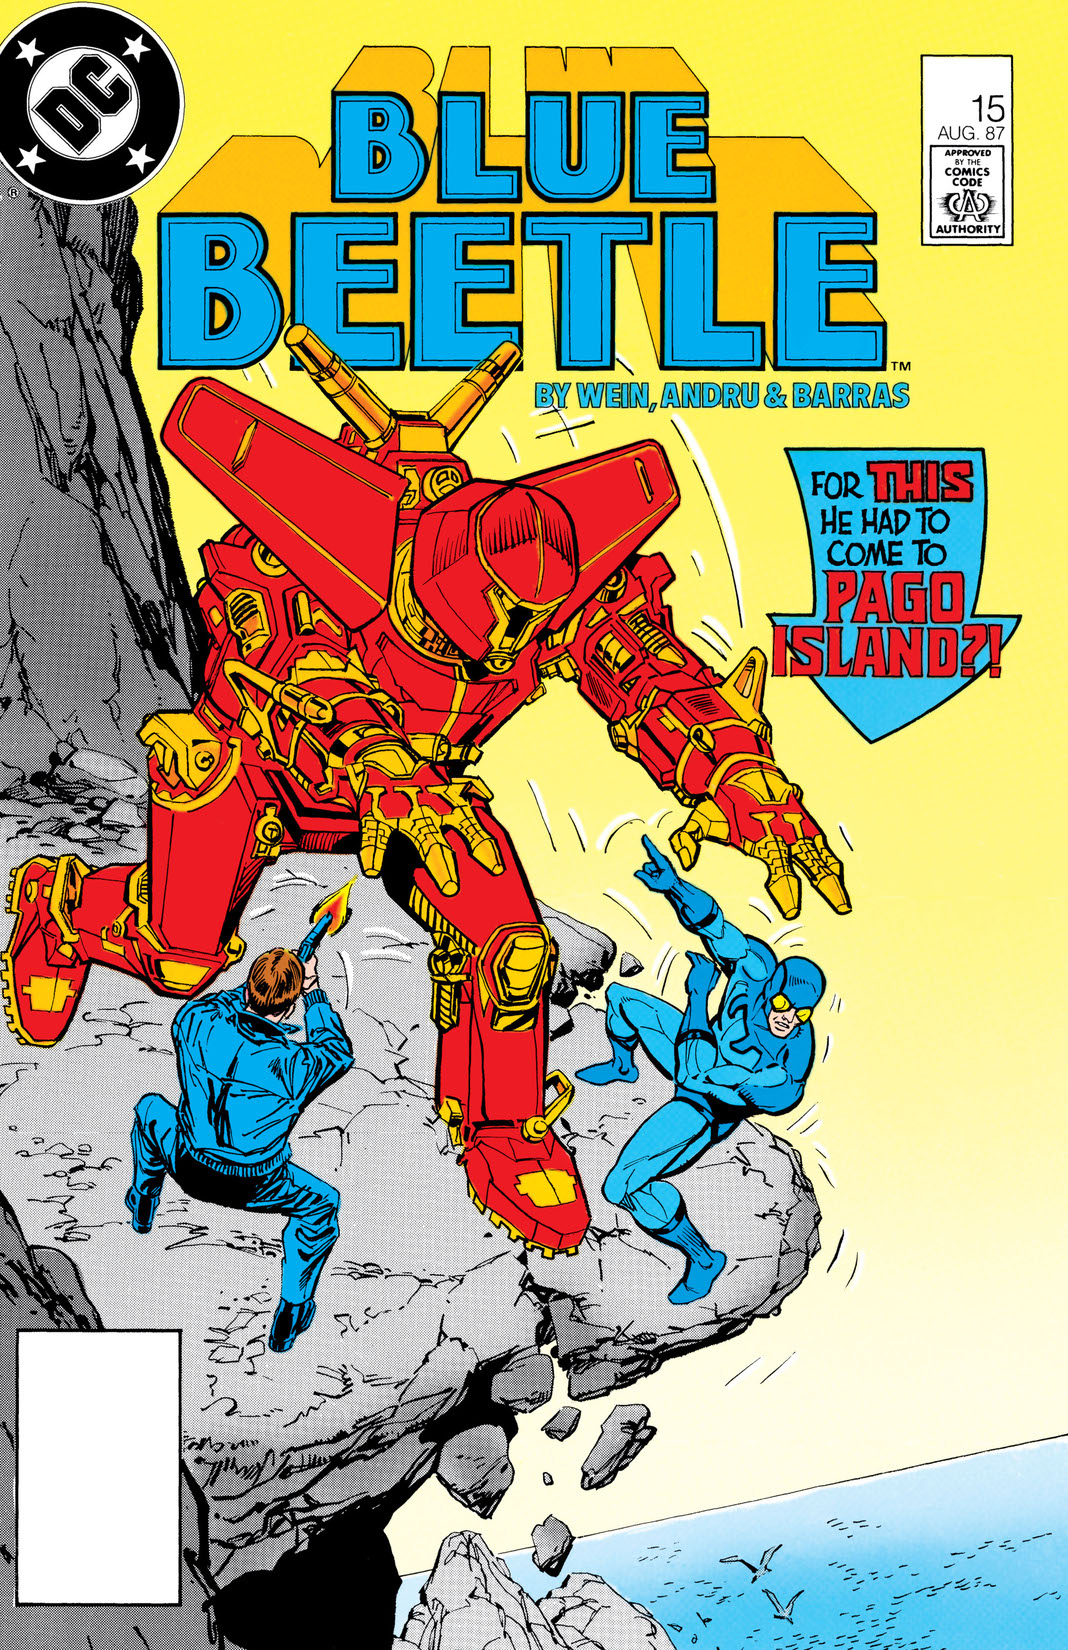 Blue Beetle (1986-) #15 preview images